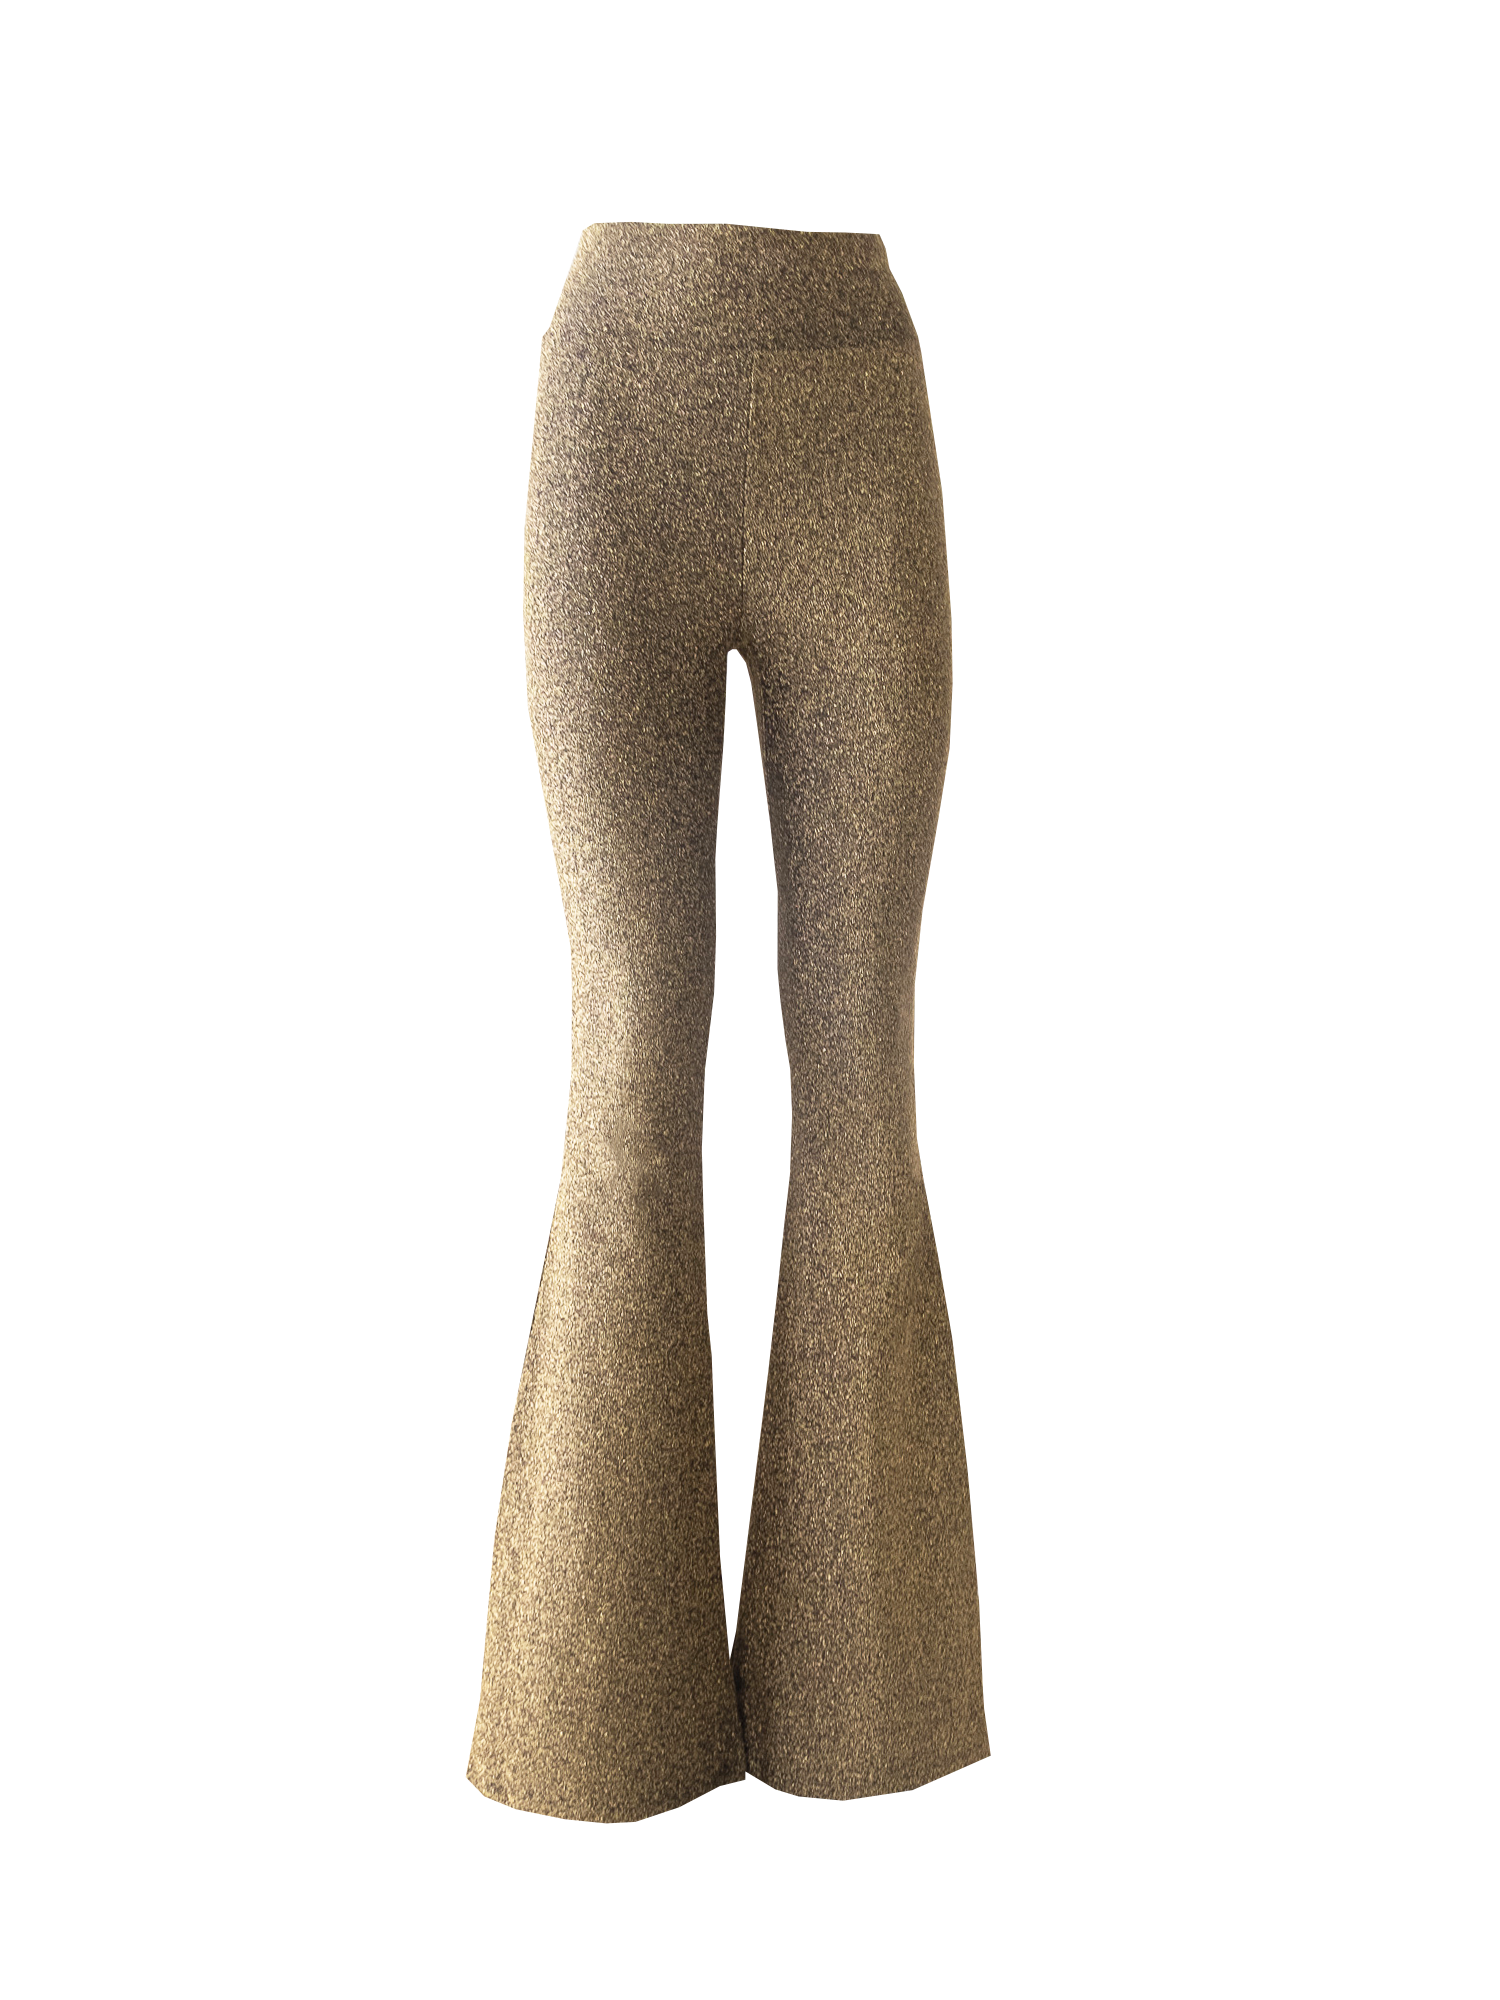 LOLA - flared pants in gold lurex